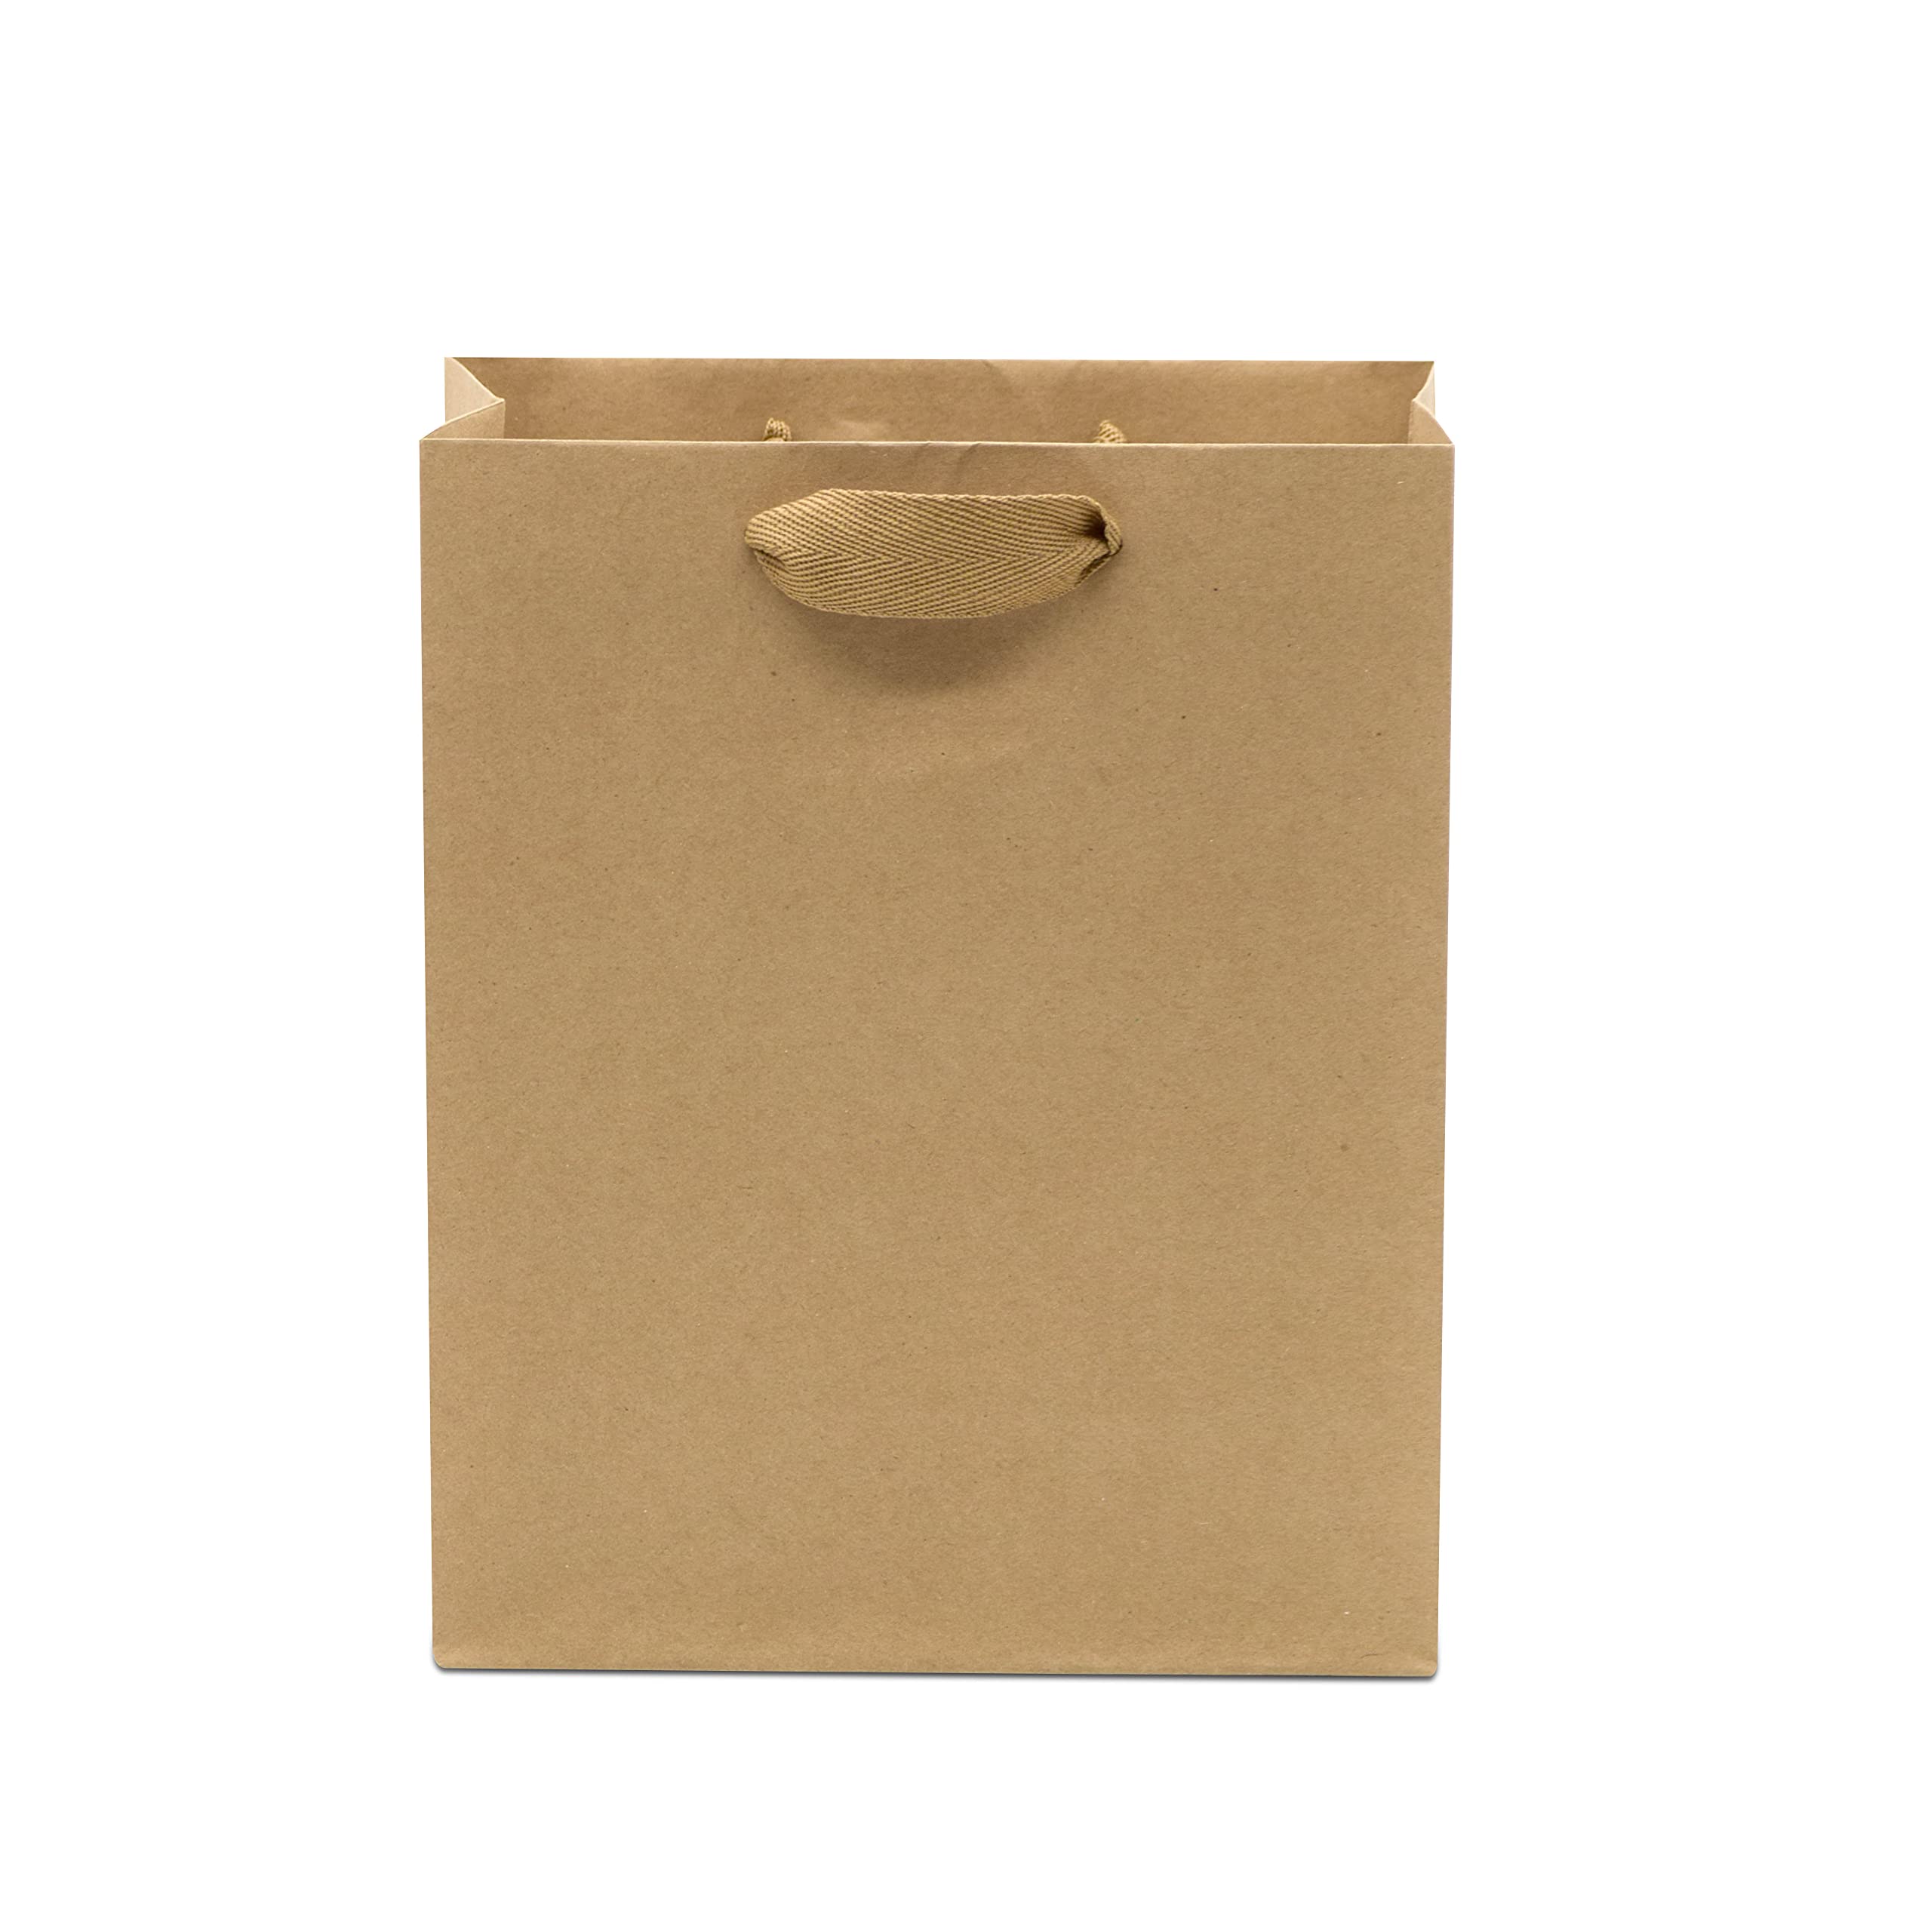 Kraft Gift Bags - 50 Pack 8x4x10 Designer Kraft Shopping Bags in Bulk, Small Gift Wrap Totes with Fabric Handles for Boutiques, Small Business, Retail Stores, Merchandise, Birthday Parties  - Like New